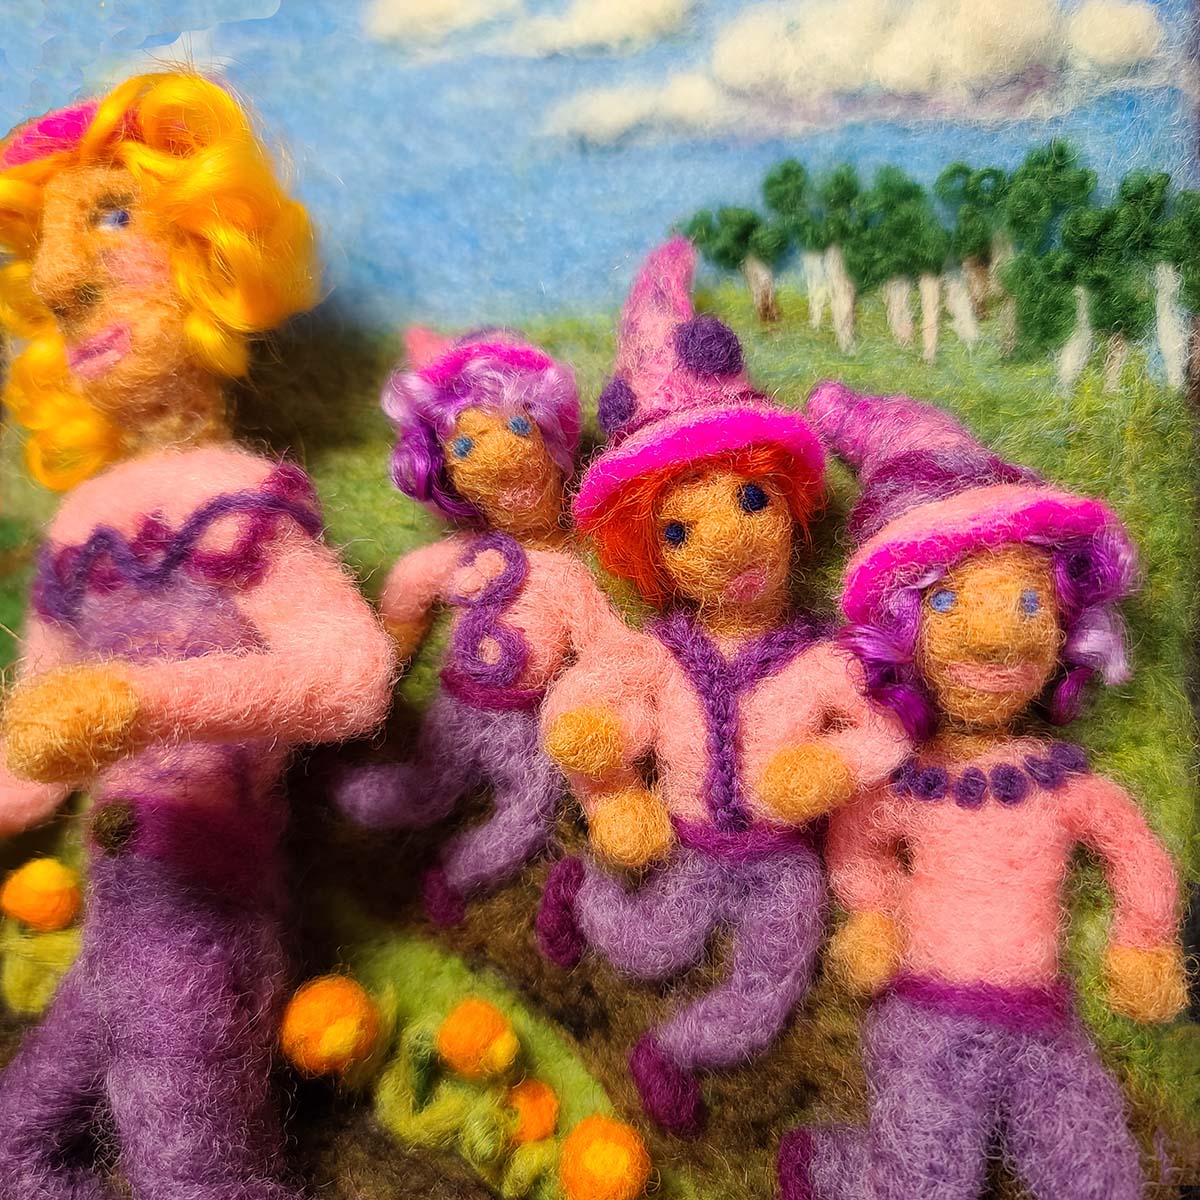 Needle Felted Elves and fairies by Hillary Dow